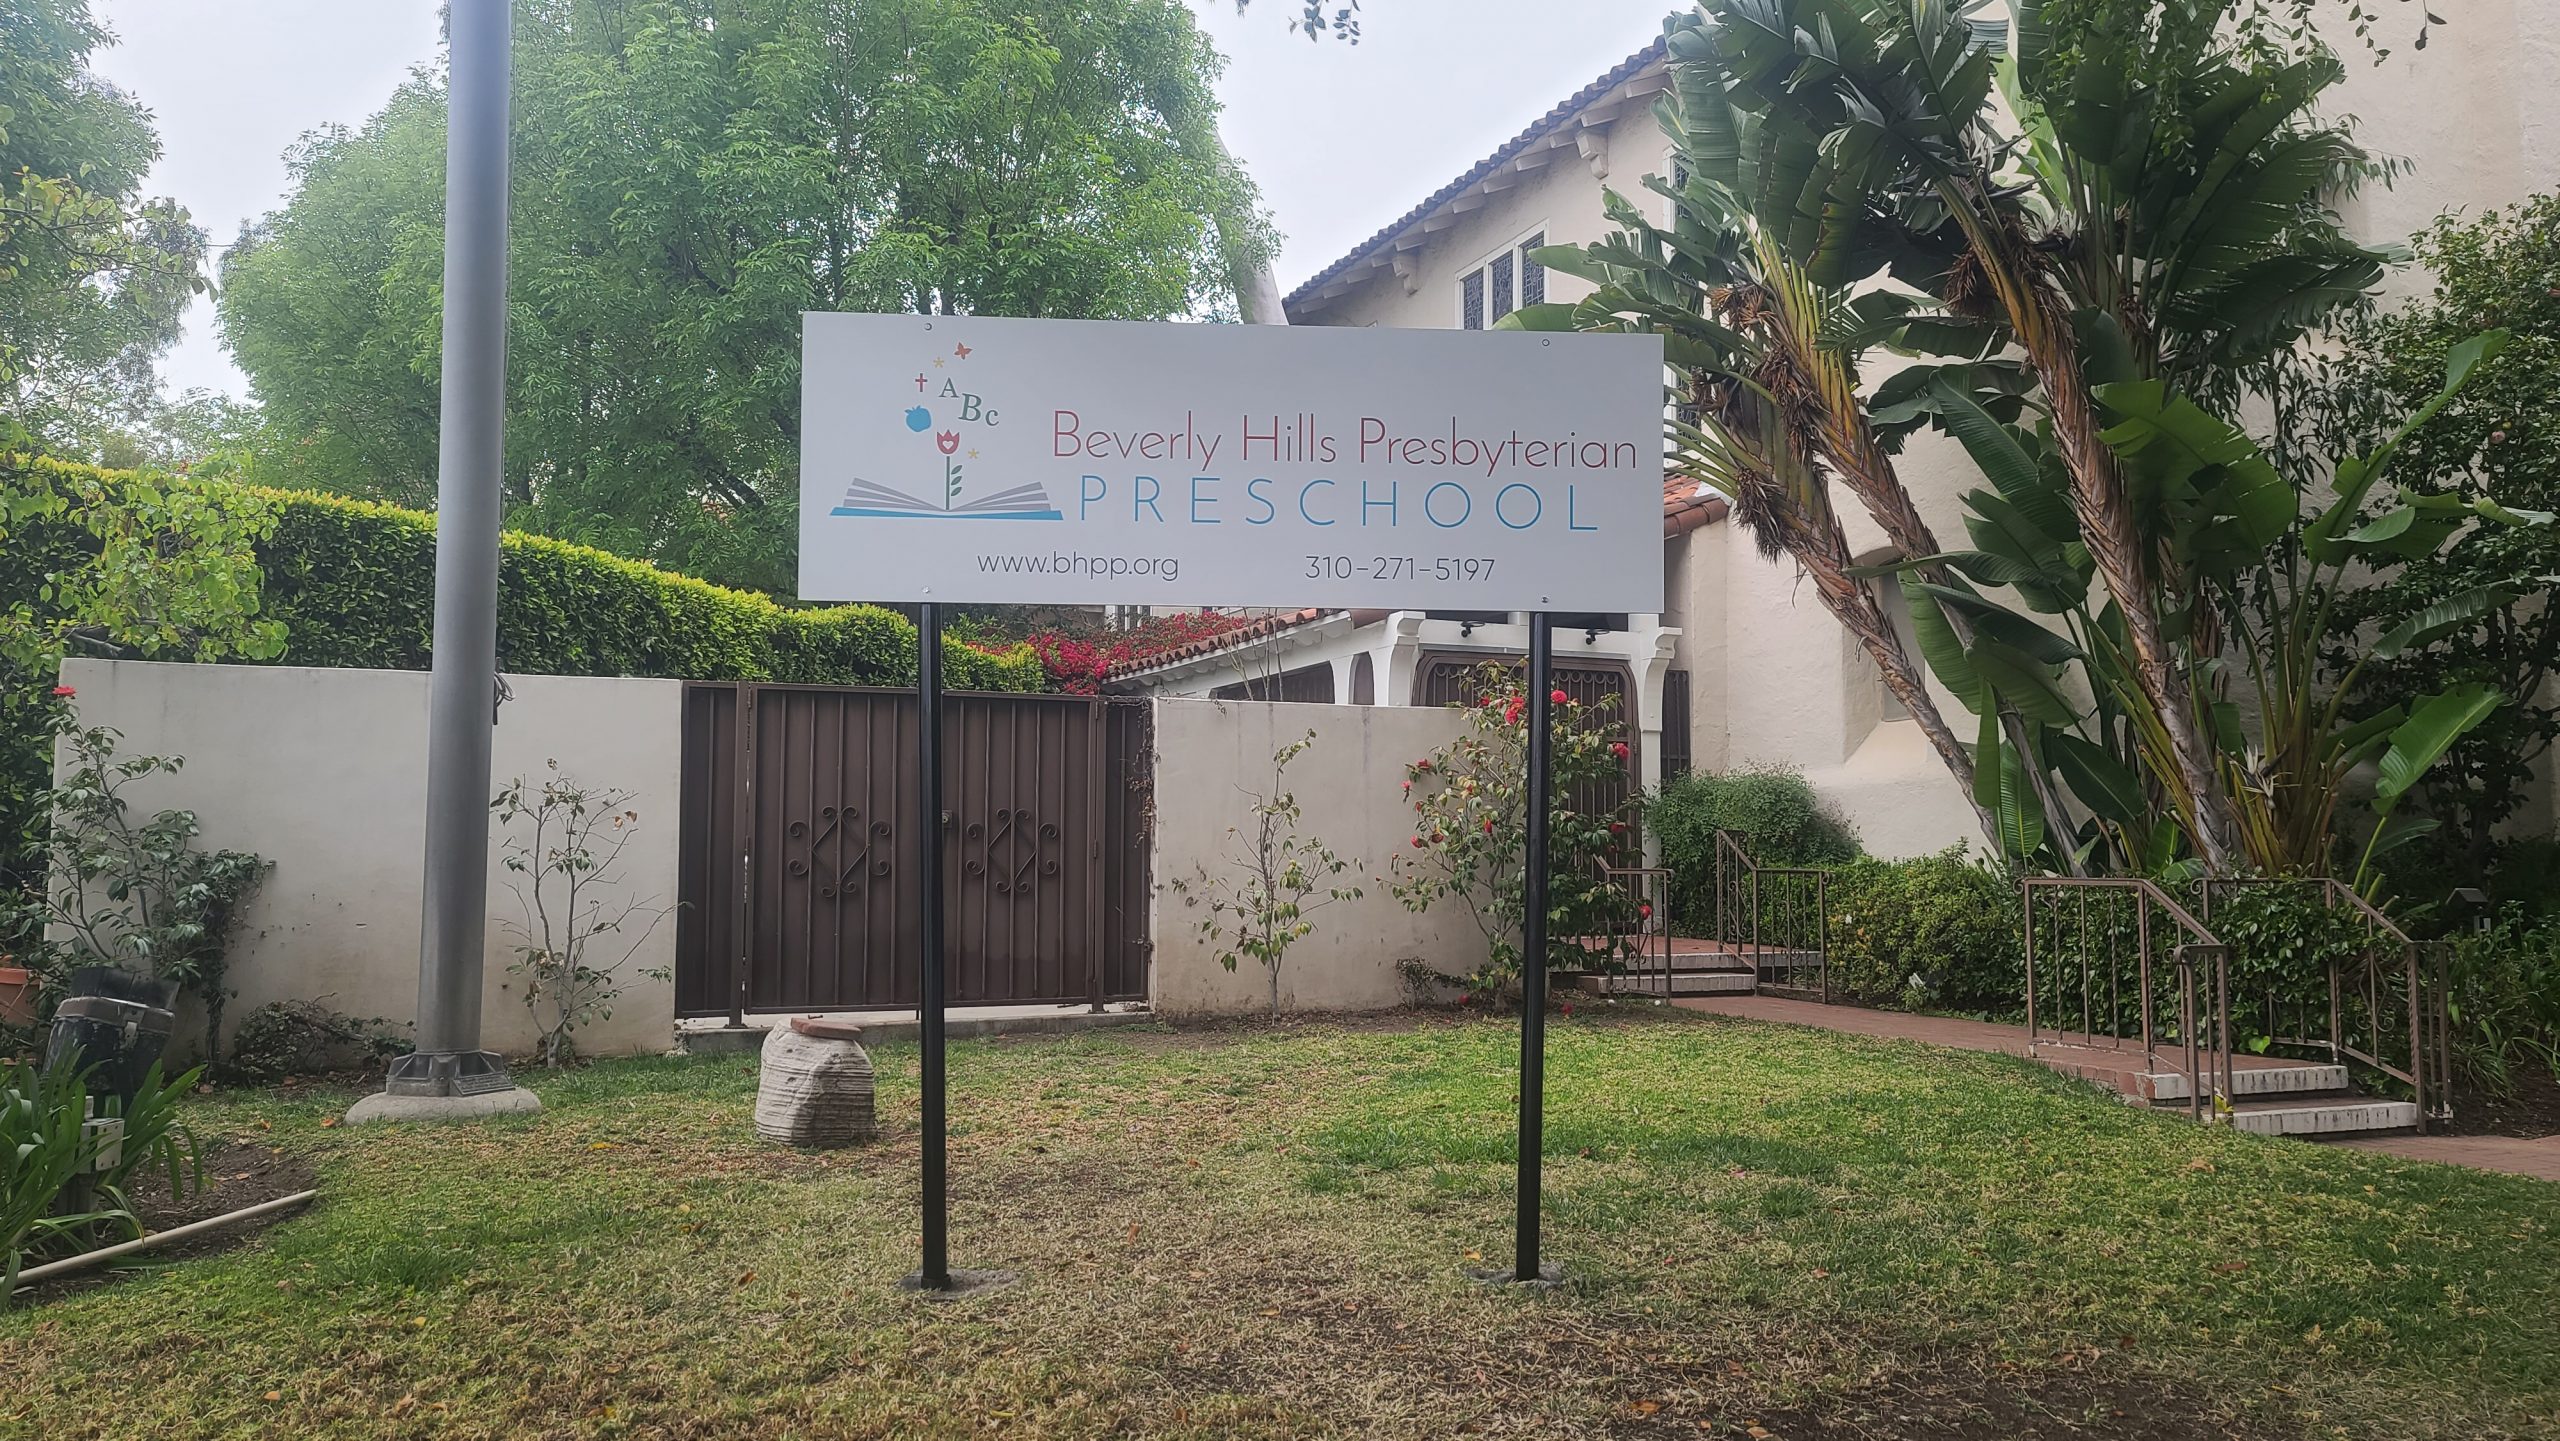 You are currently viewing Post and Panel School Sign for Beverly Hills Presbyterian